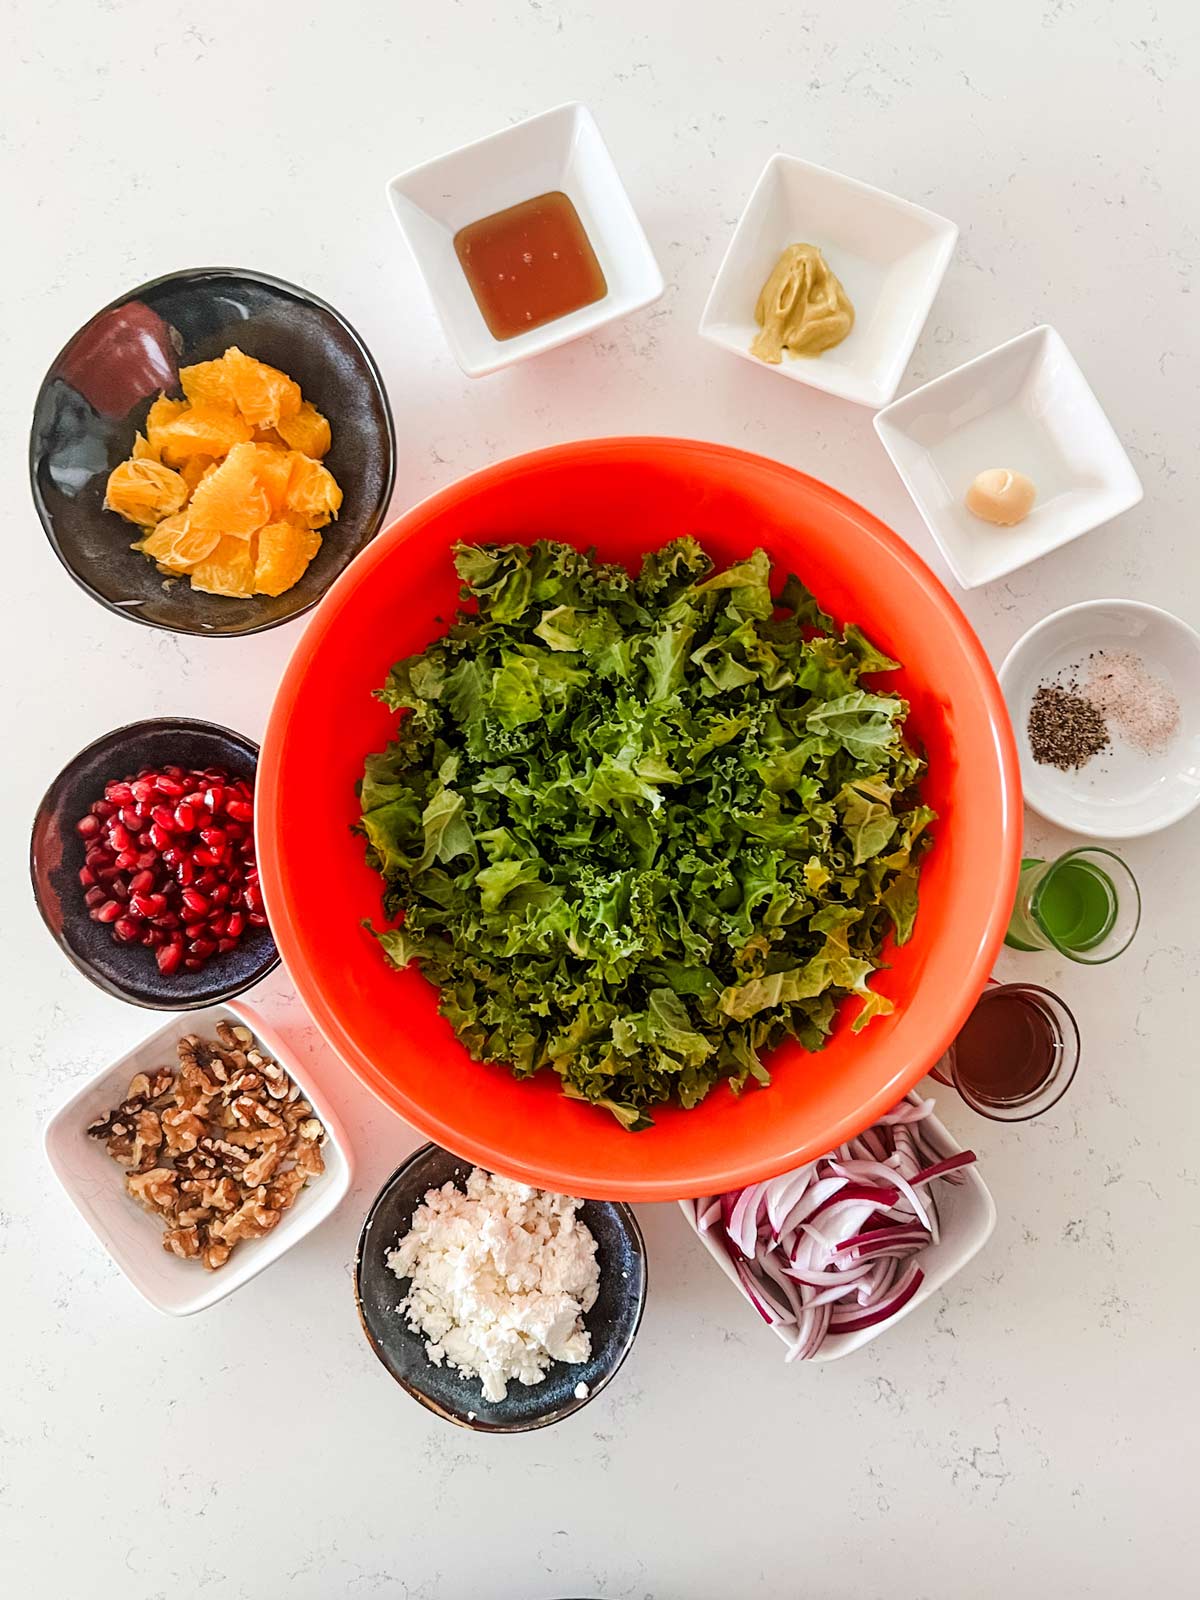 Kale, orange, pomegranate, walnuts, goat cheese, onion, and salad dressing ingredients in prep bowls.